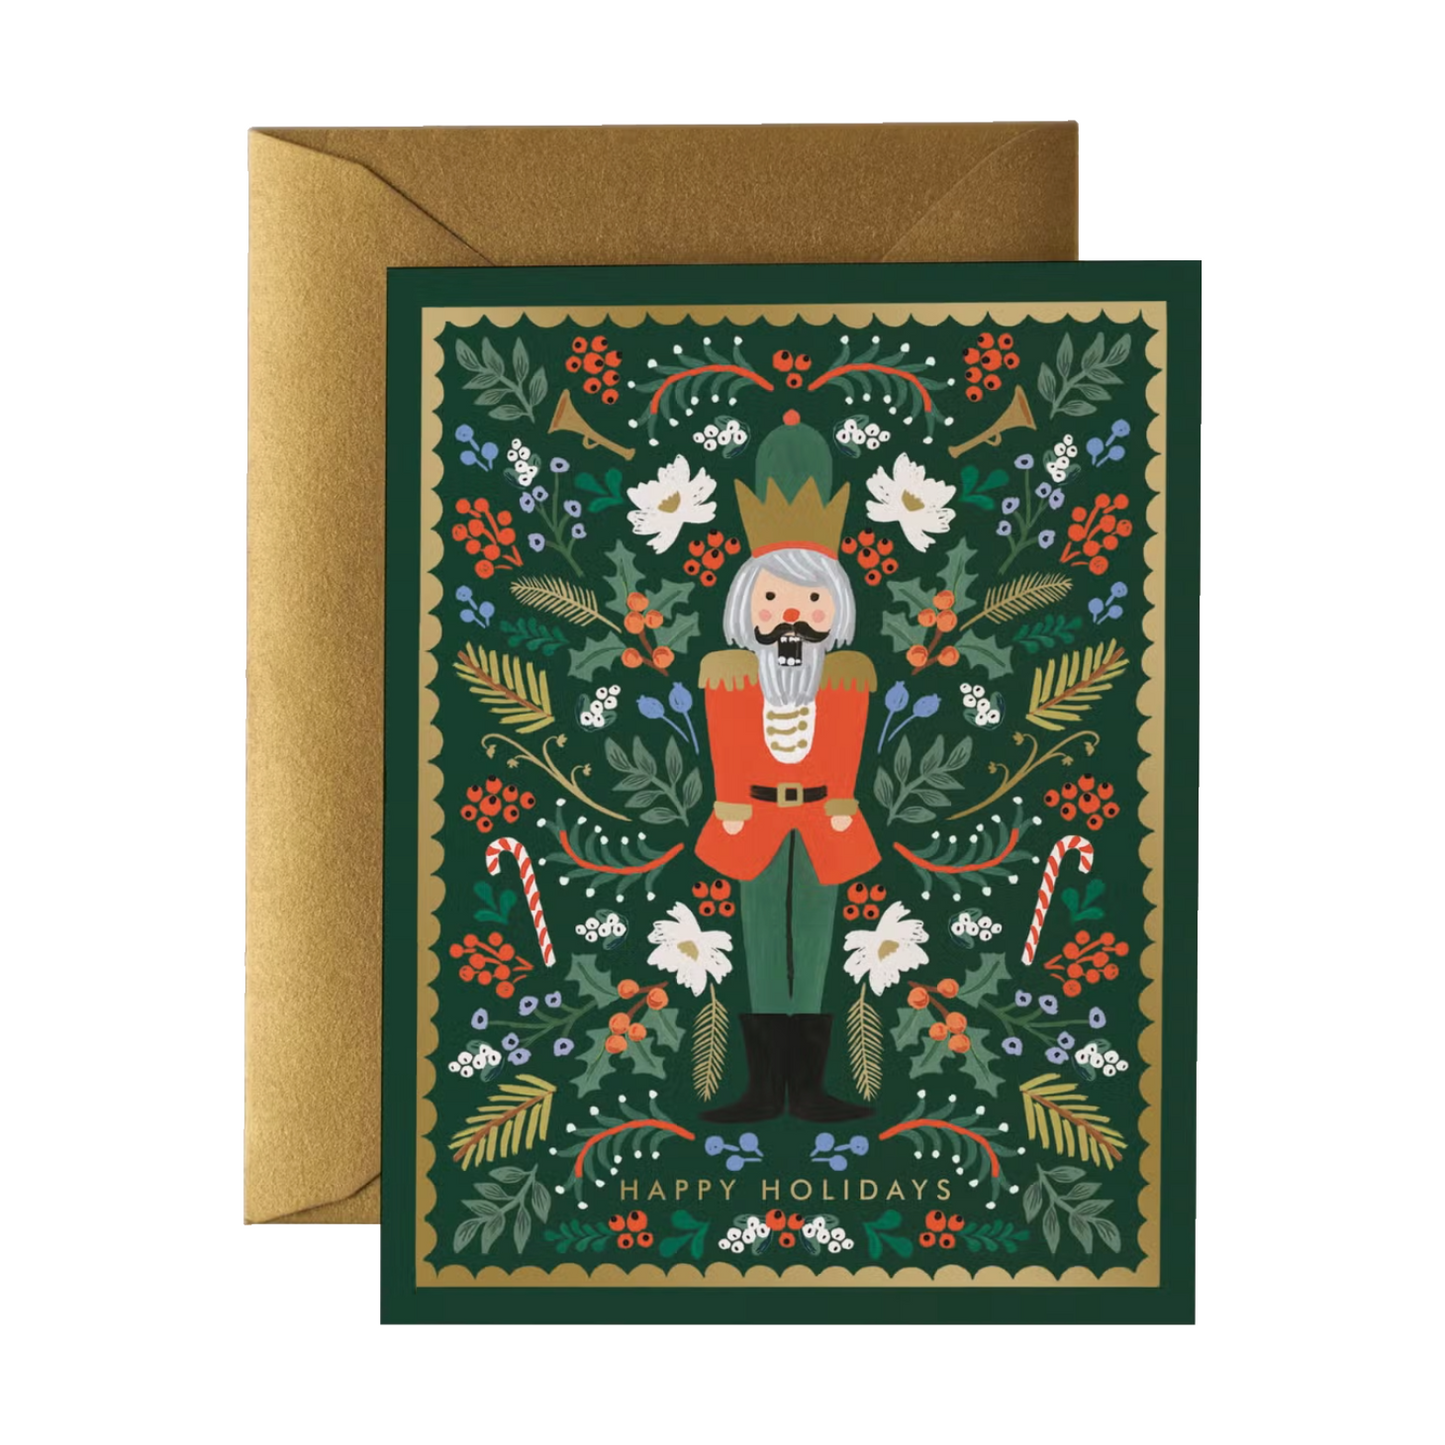 Evergreen Nutcracker Boxed Set by Rifle Paper Co.